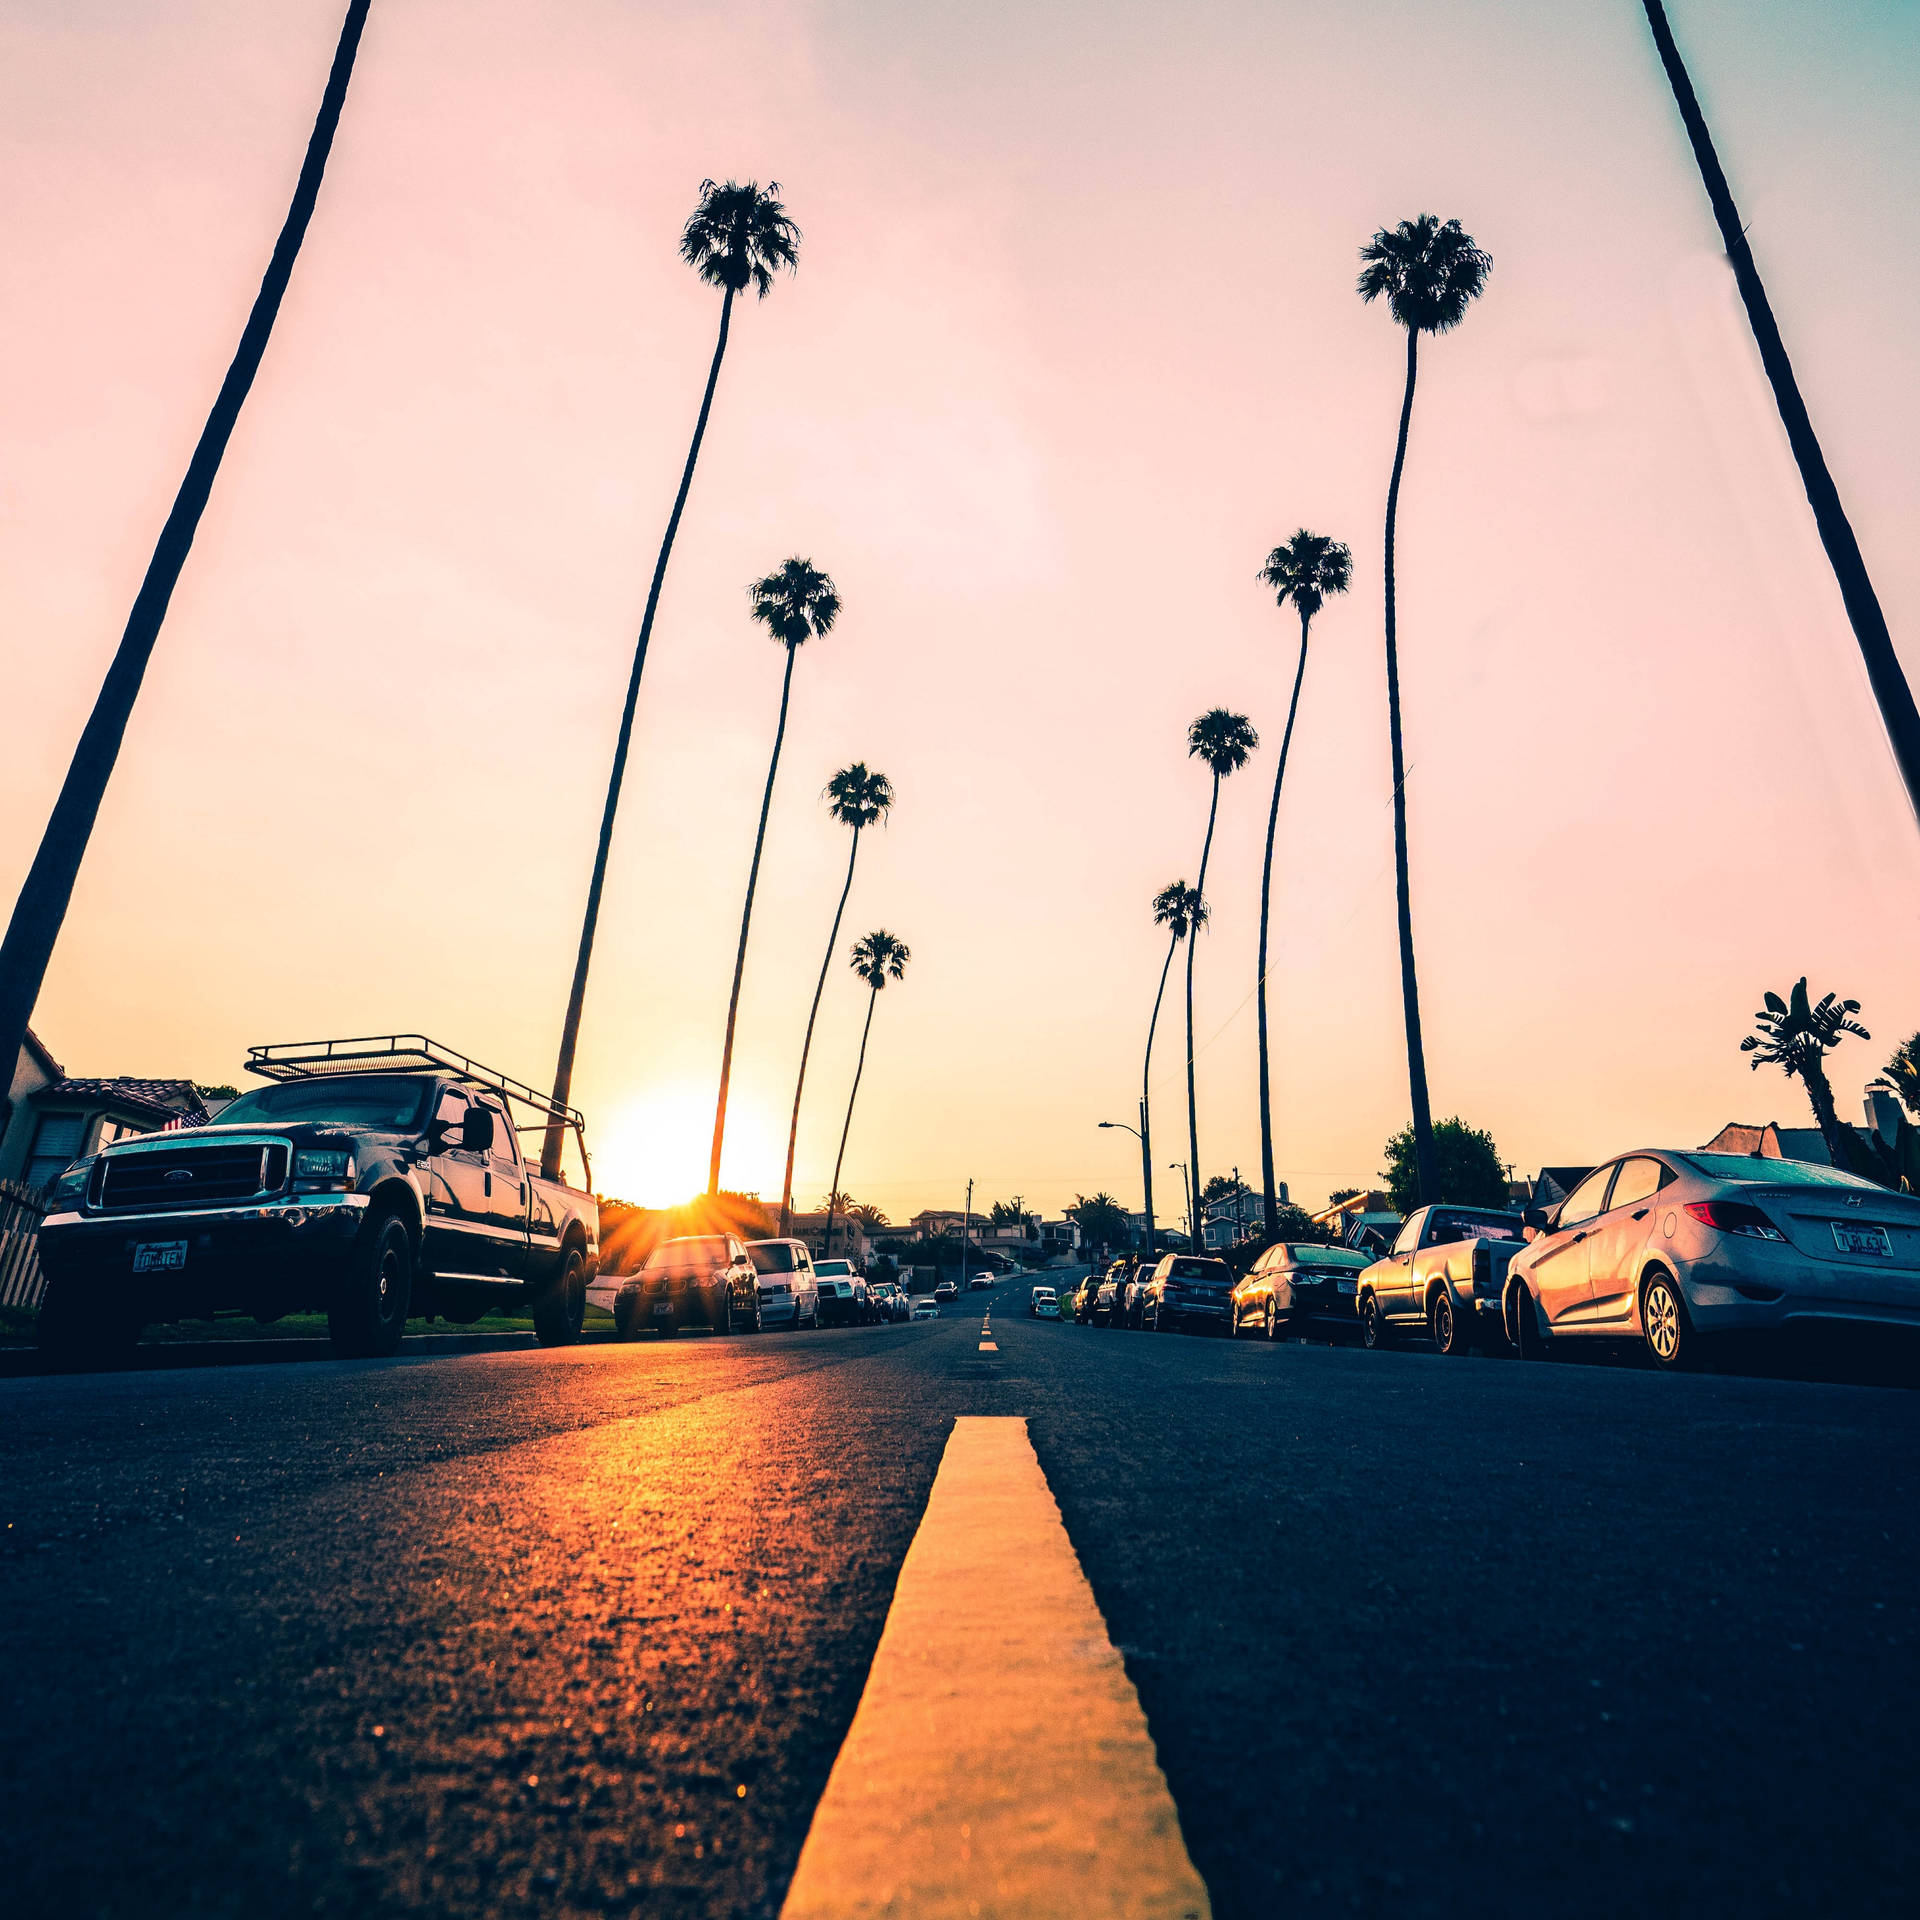 California Road With Palm Trees Wallpaper